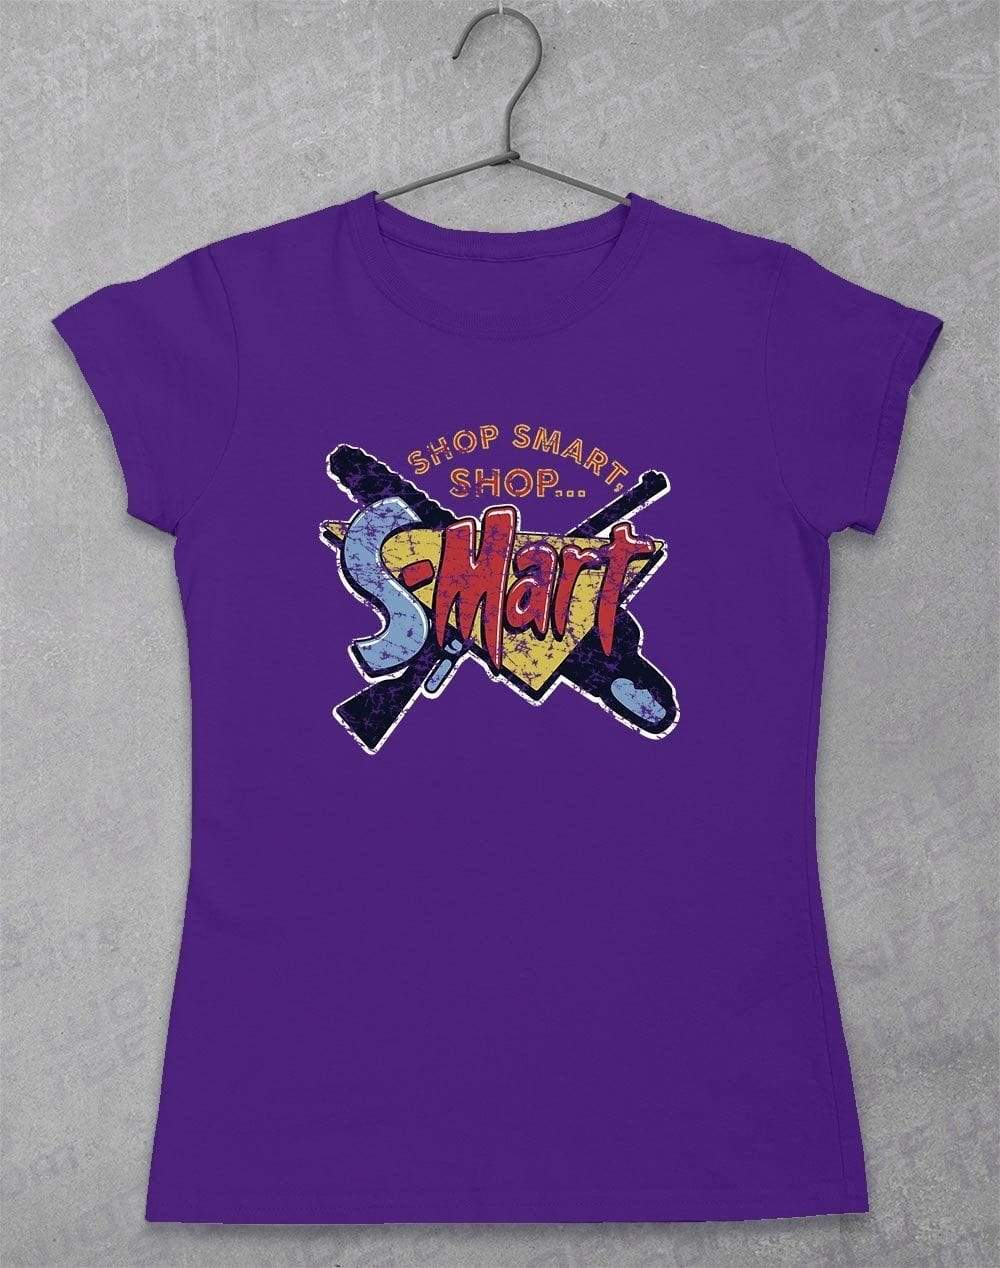 S-Mart Chainsaw and Gun Women's T-Shirt 8-10 / Lilac  - Off World Tees